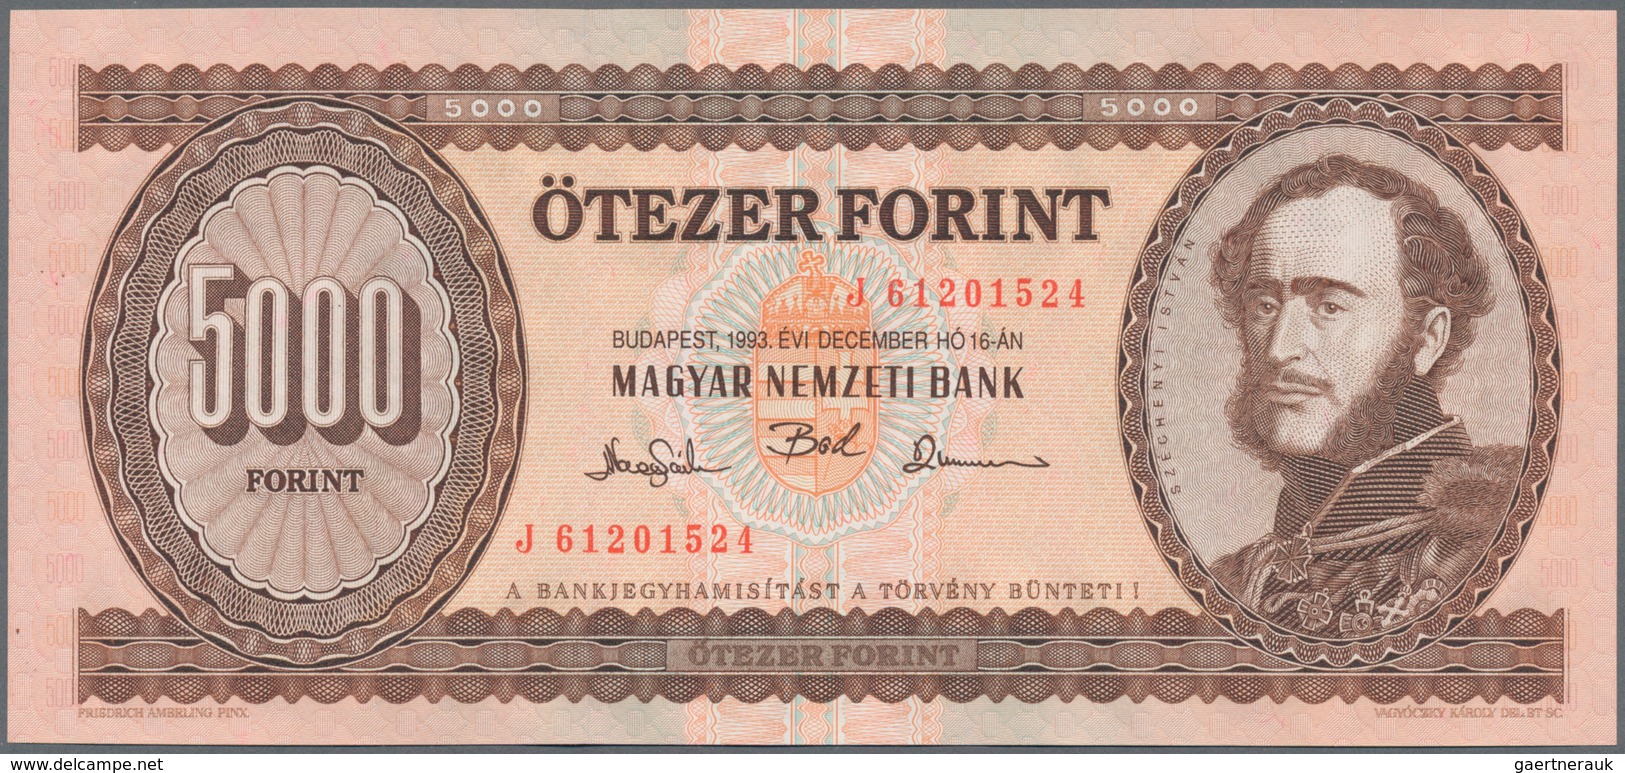 Hungary / Ungarn: Set with 11 banknotes of the 1990 till 1995 series with 100 Forint 1992 (UNC), 199